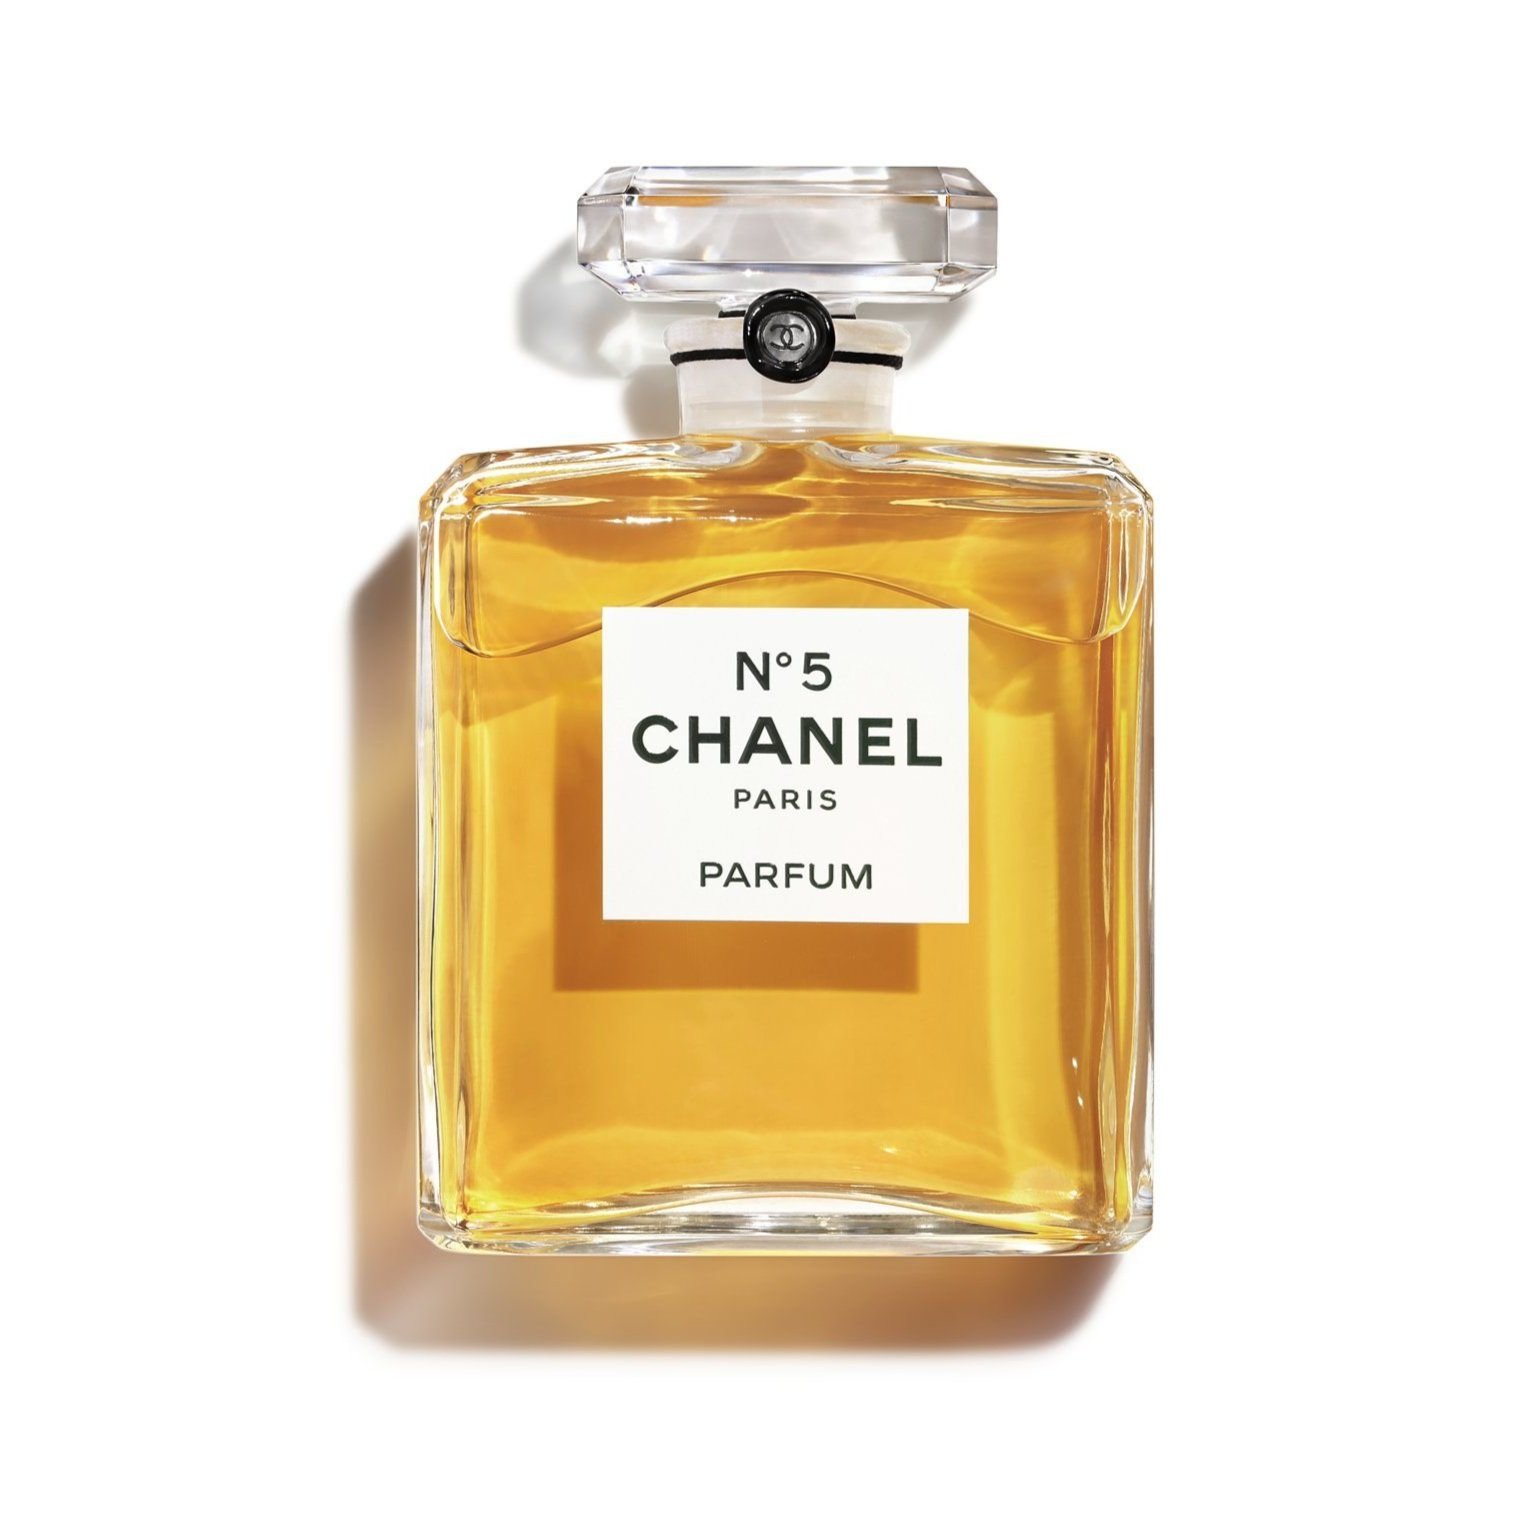 Chanel prevails in unfair competition case over its No5 perfume bottle ...